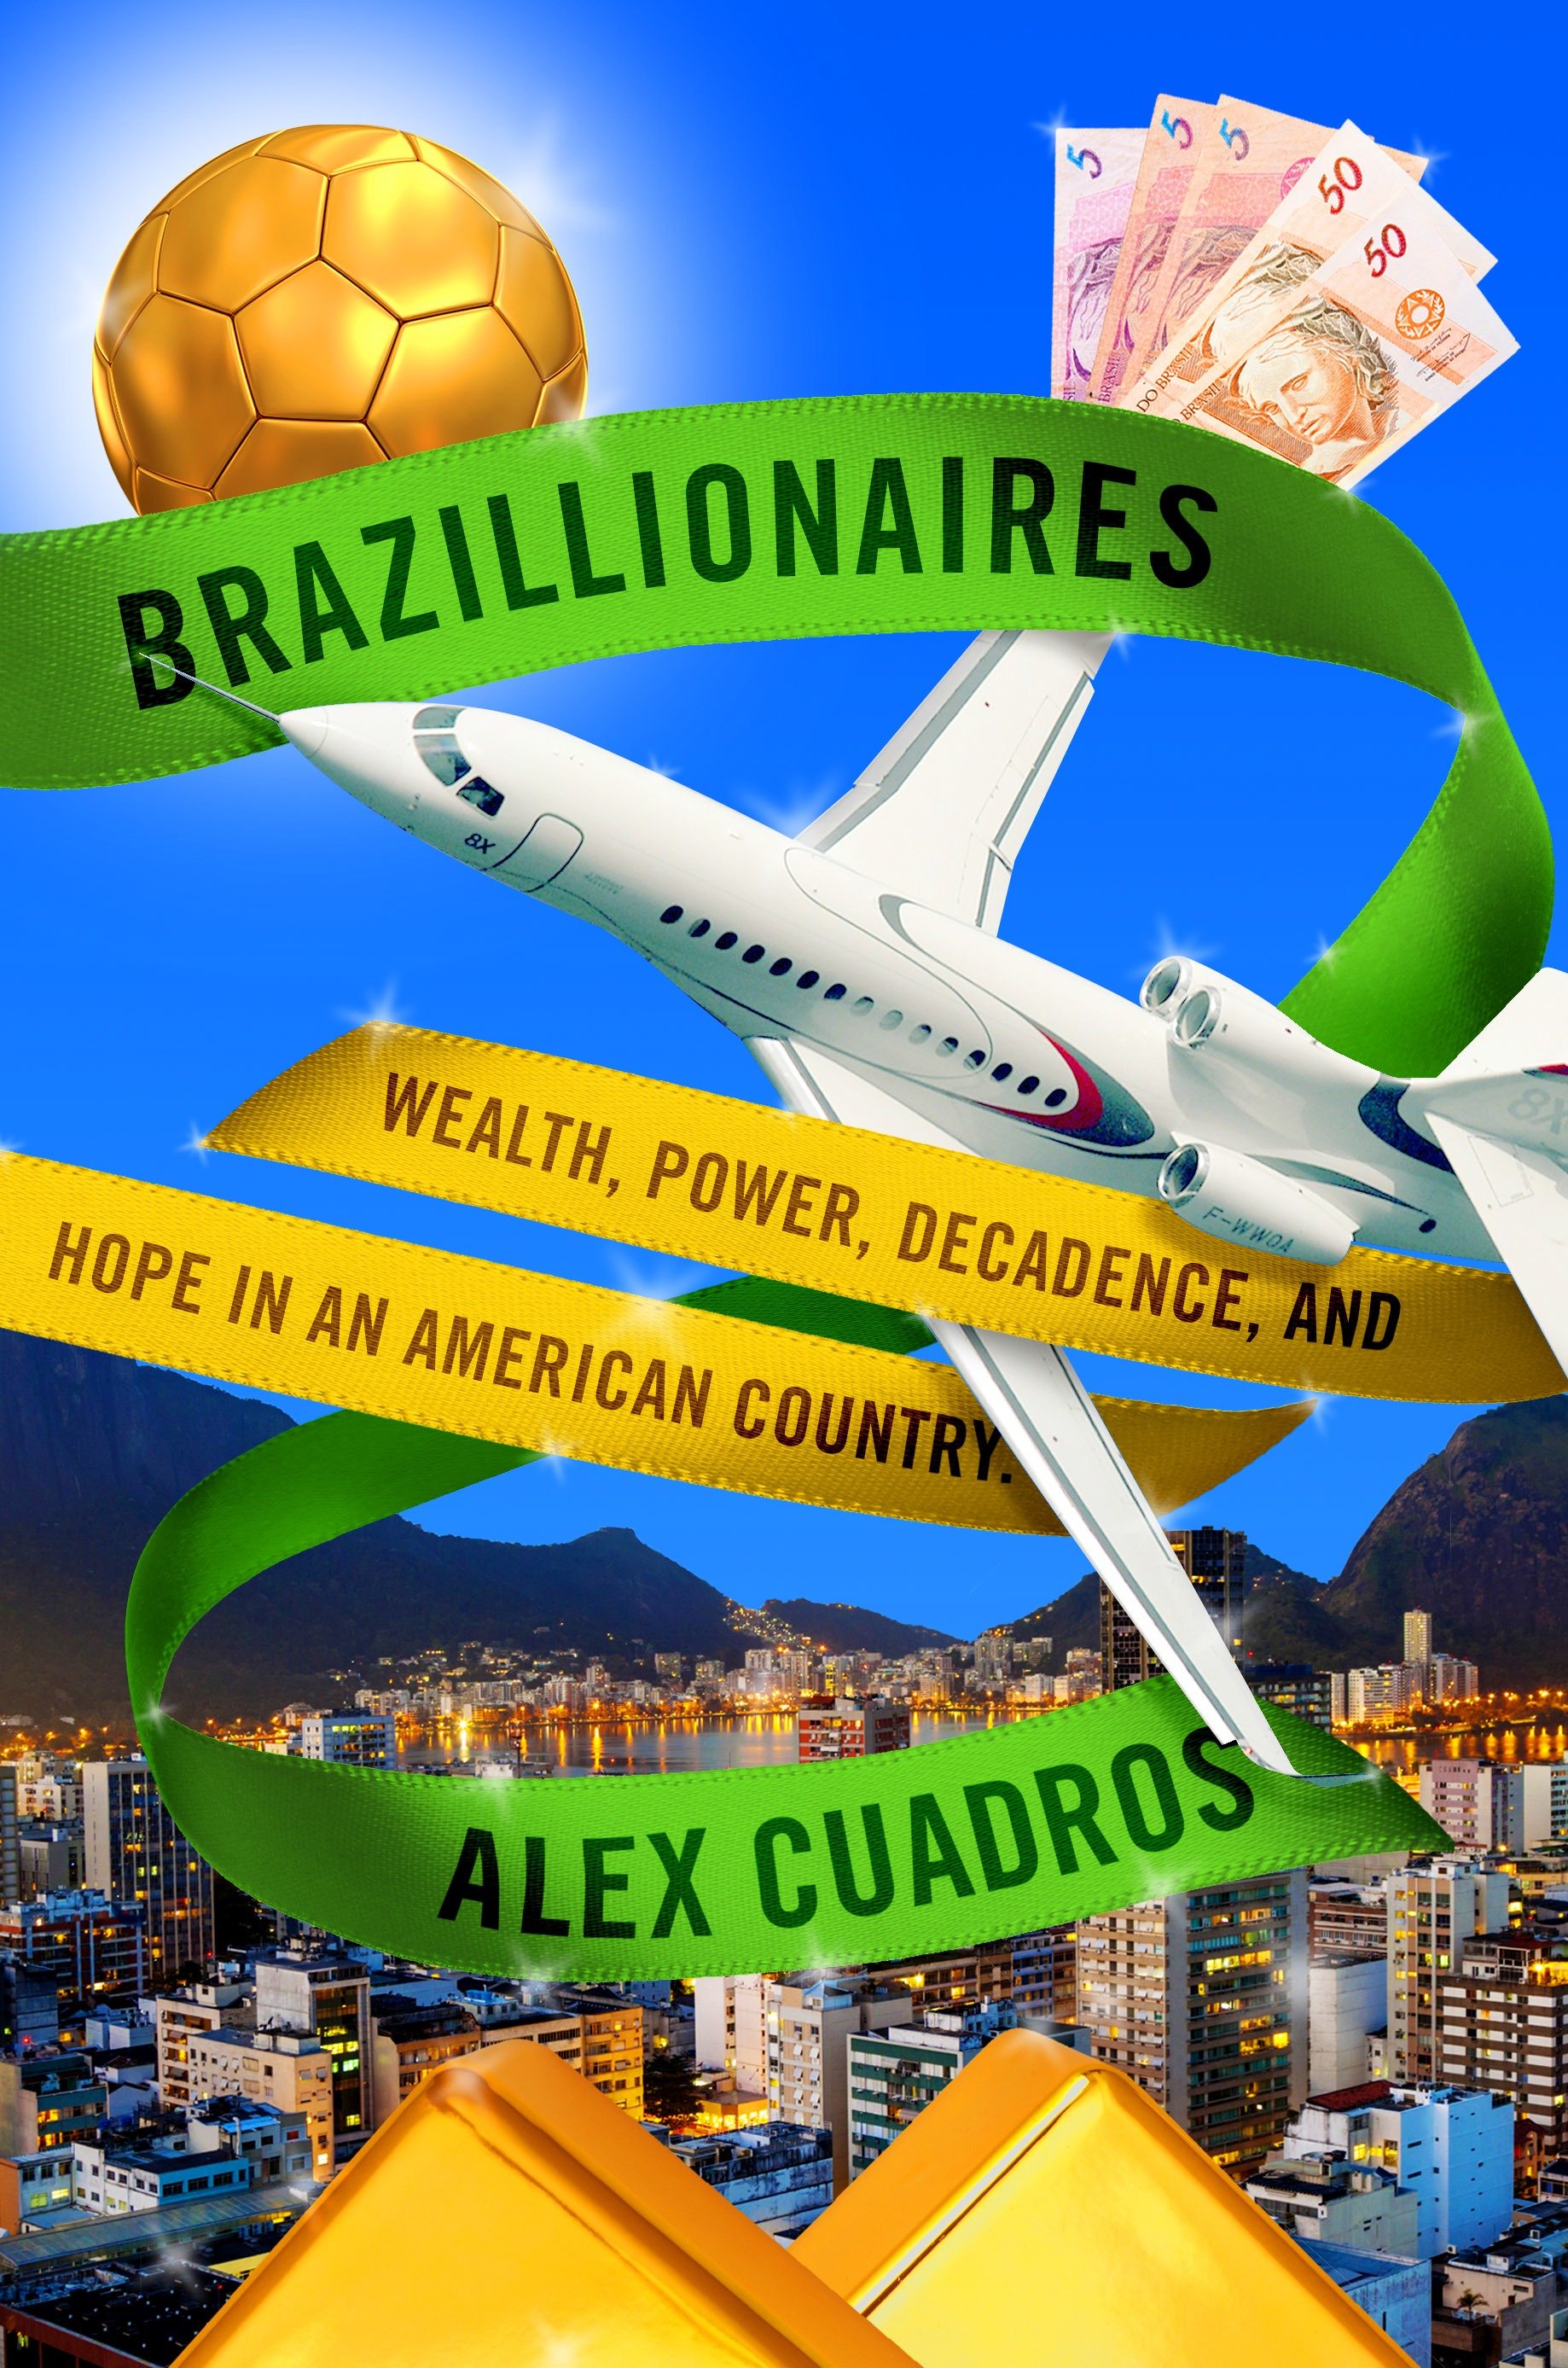 Imagen de portada para Brazillionaires [electronic resource] : Wealth, Power, Decadence, and Hope in an American Country